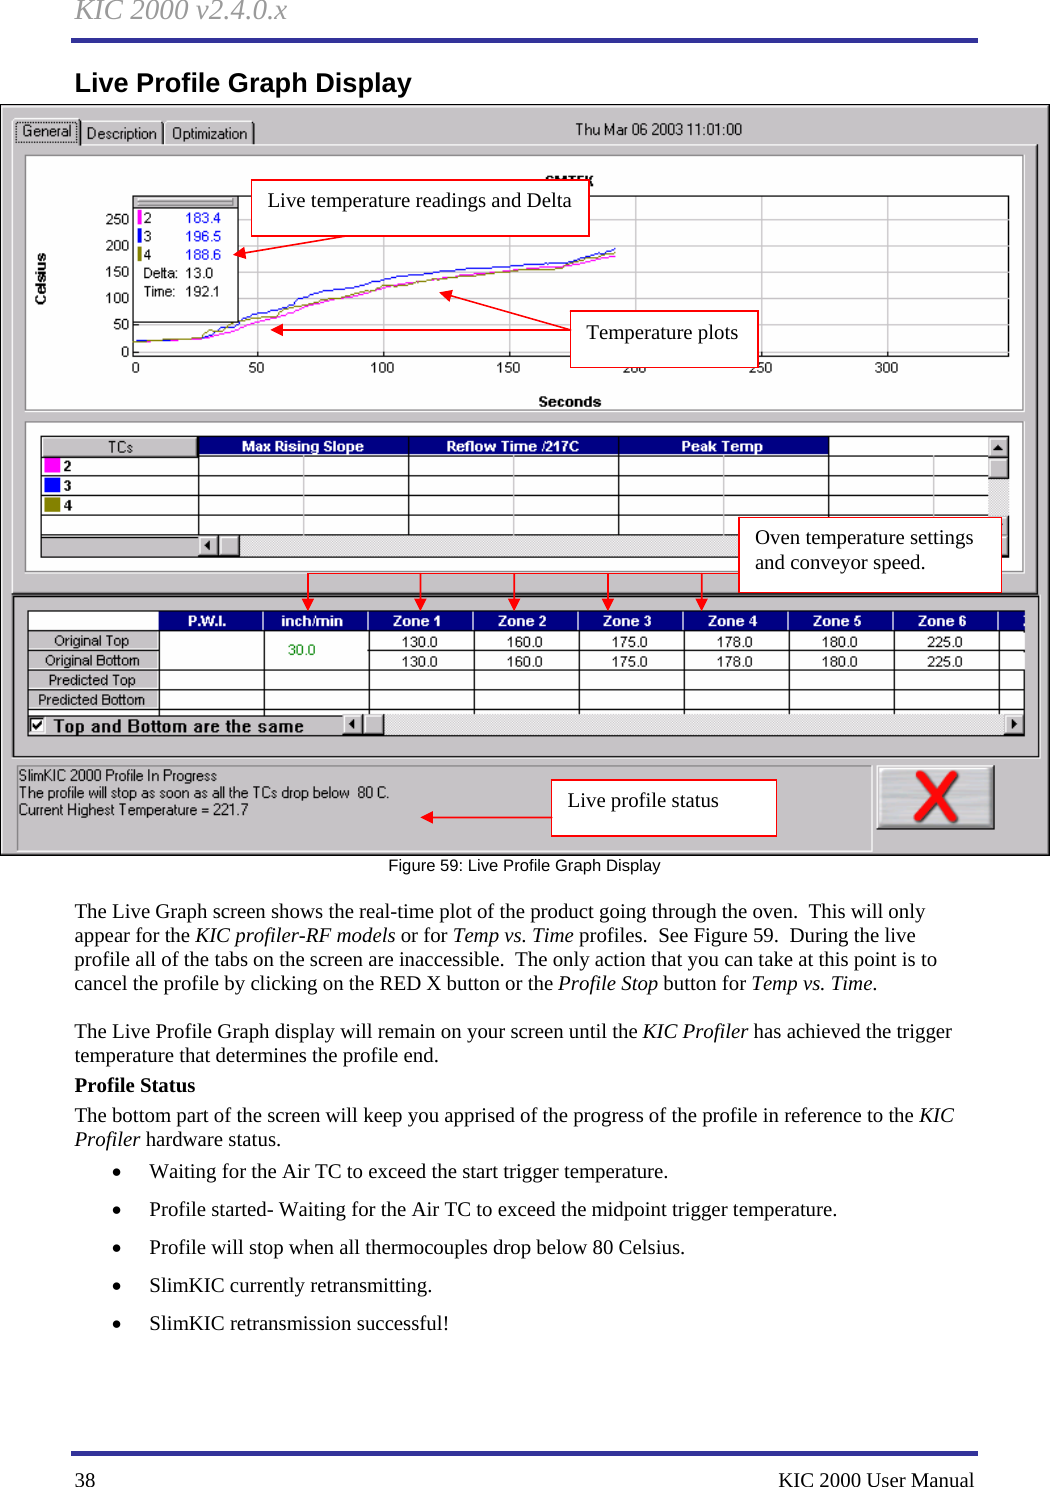 KIC 2000 v2.4.0.x 38    KIC 2000 User Manual Live Profile Graph Display  Figure 59: Live Profile Graph Display  The Live Graph screen shows the real-time plot of the product going through the oven.  This will only appear for the KIC profiler-RF models or for Temp vs. Time profiles.  See Figure 59.  During the live profile all of the tabs on the screen are inaccessible.  The only action that you can take at this point is to cancel the profile by clicking on the RED X button or the Profile Stop button for Temp vs. Time.  The Live Profile Graph display will remain on your screen until the KIC Profiler has achieved the trigger temperature that determines the profile end. Profile Status The bottom part of the screen will keep you apprised of the progress of the profile in reference to the KIC Profiler hardware status. • Waiting for the Air TC to exceed the start trigger temperature.   • Profile started- Waiting for the Air TC to exceed the midpoint trigger temperature.   • Profile will stop when all thermocouples drop below 80 Celsius.   • SlimKIC currently retransmitting.   • SlimKIC retransmission successful!  Live temperature readings and Delta Temperature plots Oven temperature settings and conveyor speed. Live profile status 